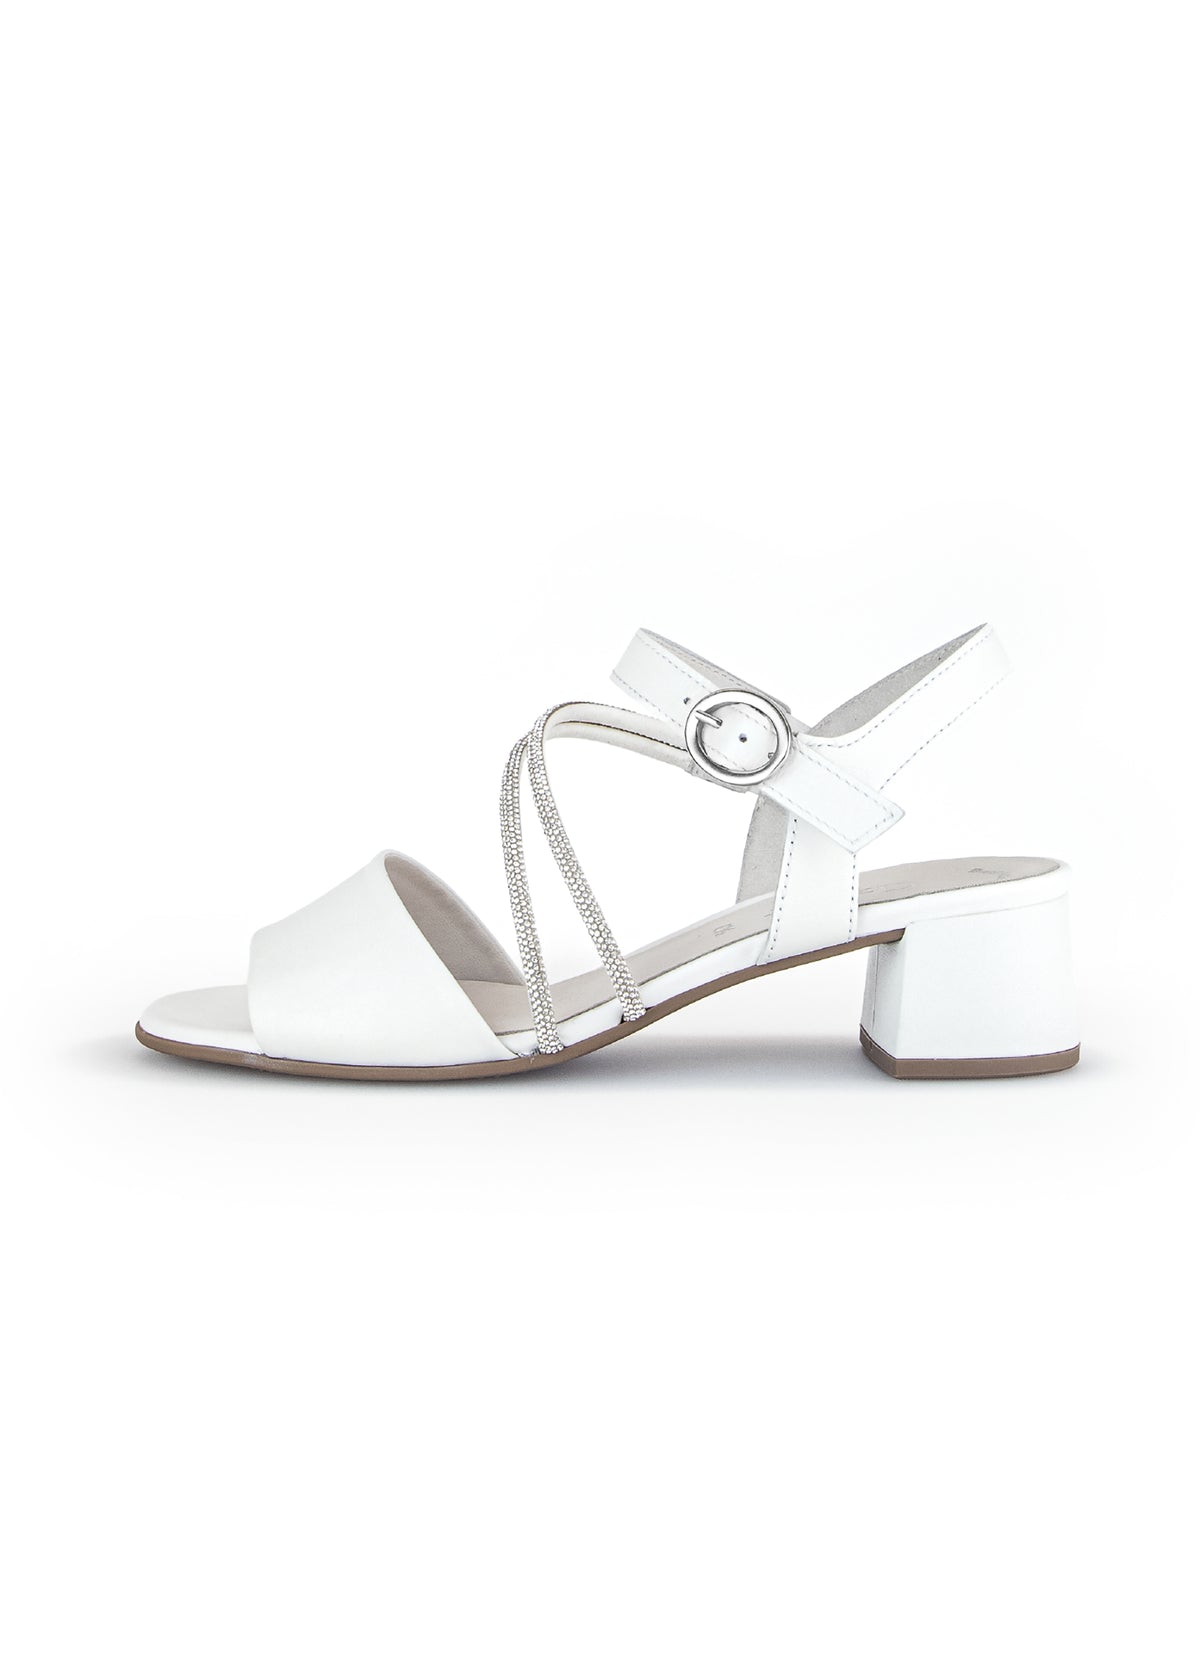 Festive sandals with studded heels - white leather, silver straps